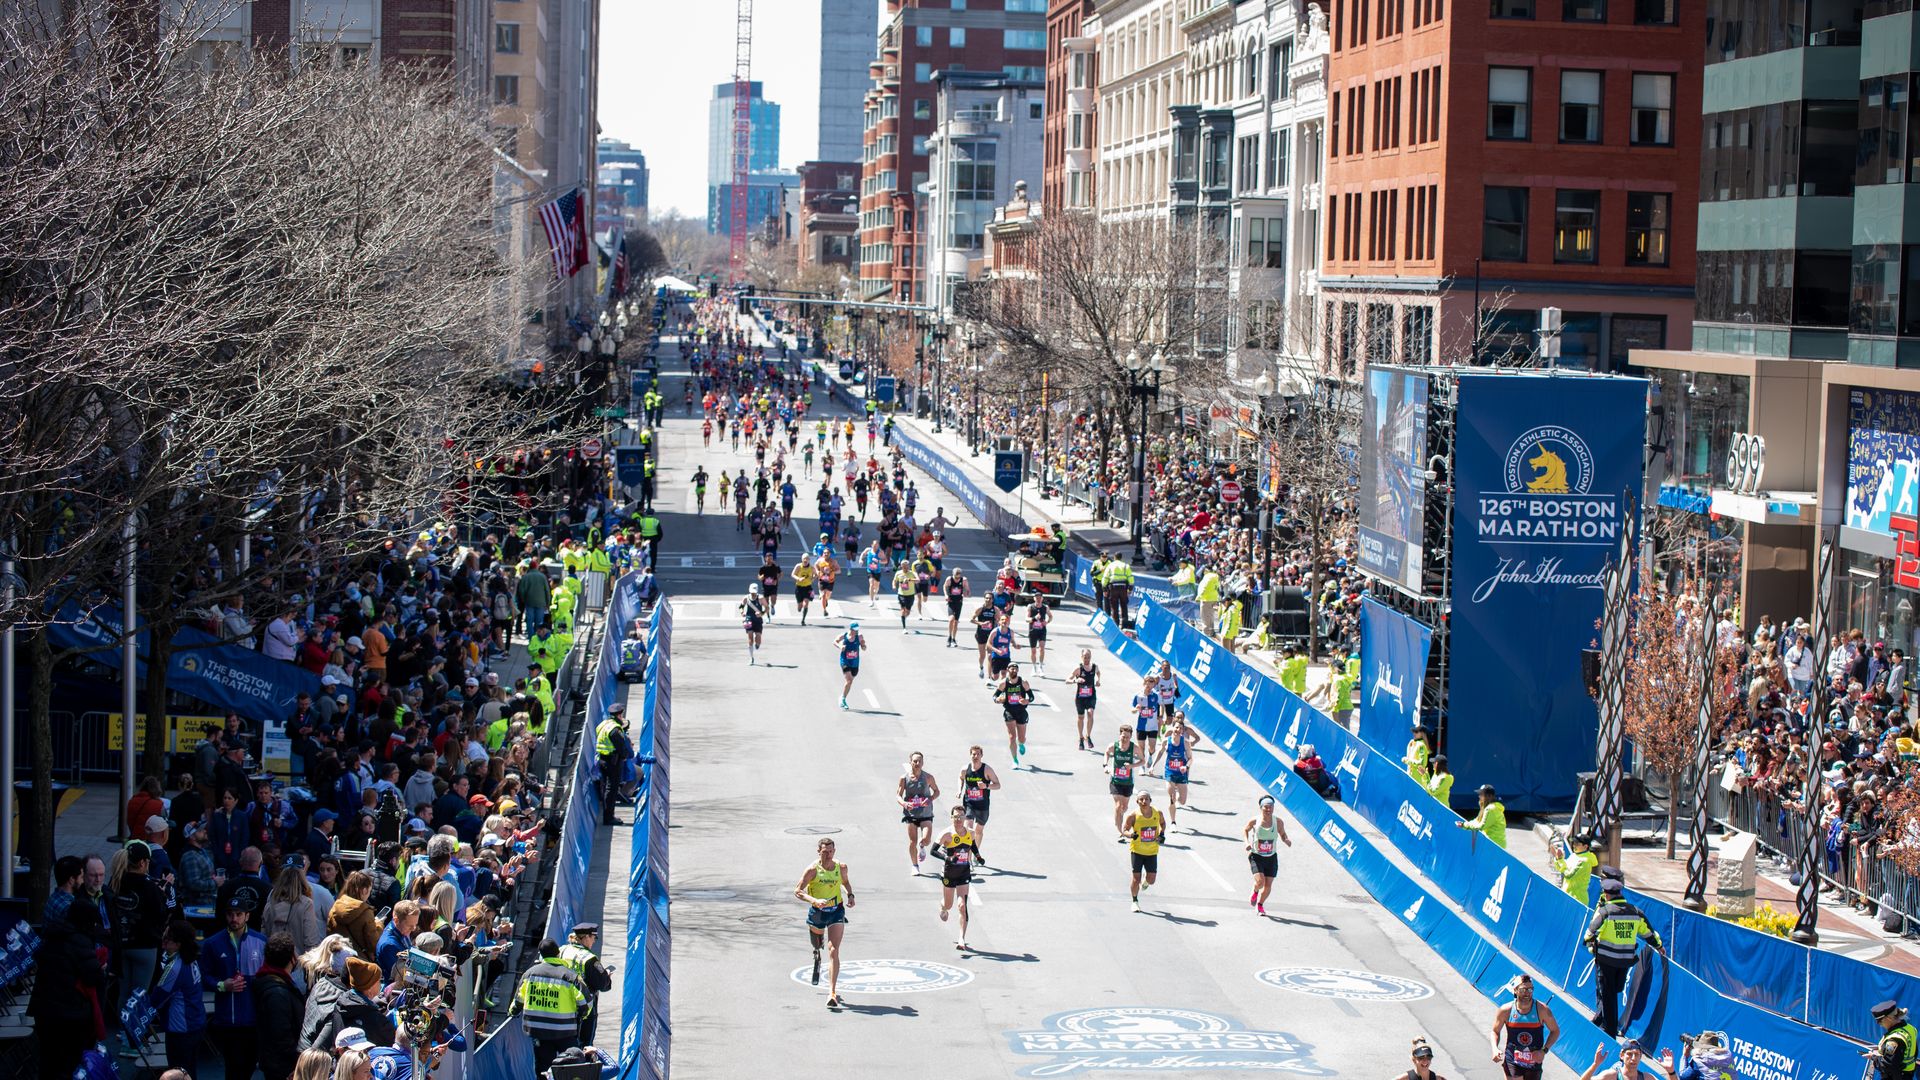 Runners on the Boston Marathon route head down the street as crowds cheer them on and watch.